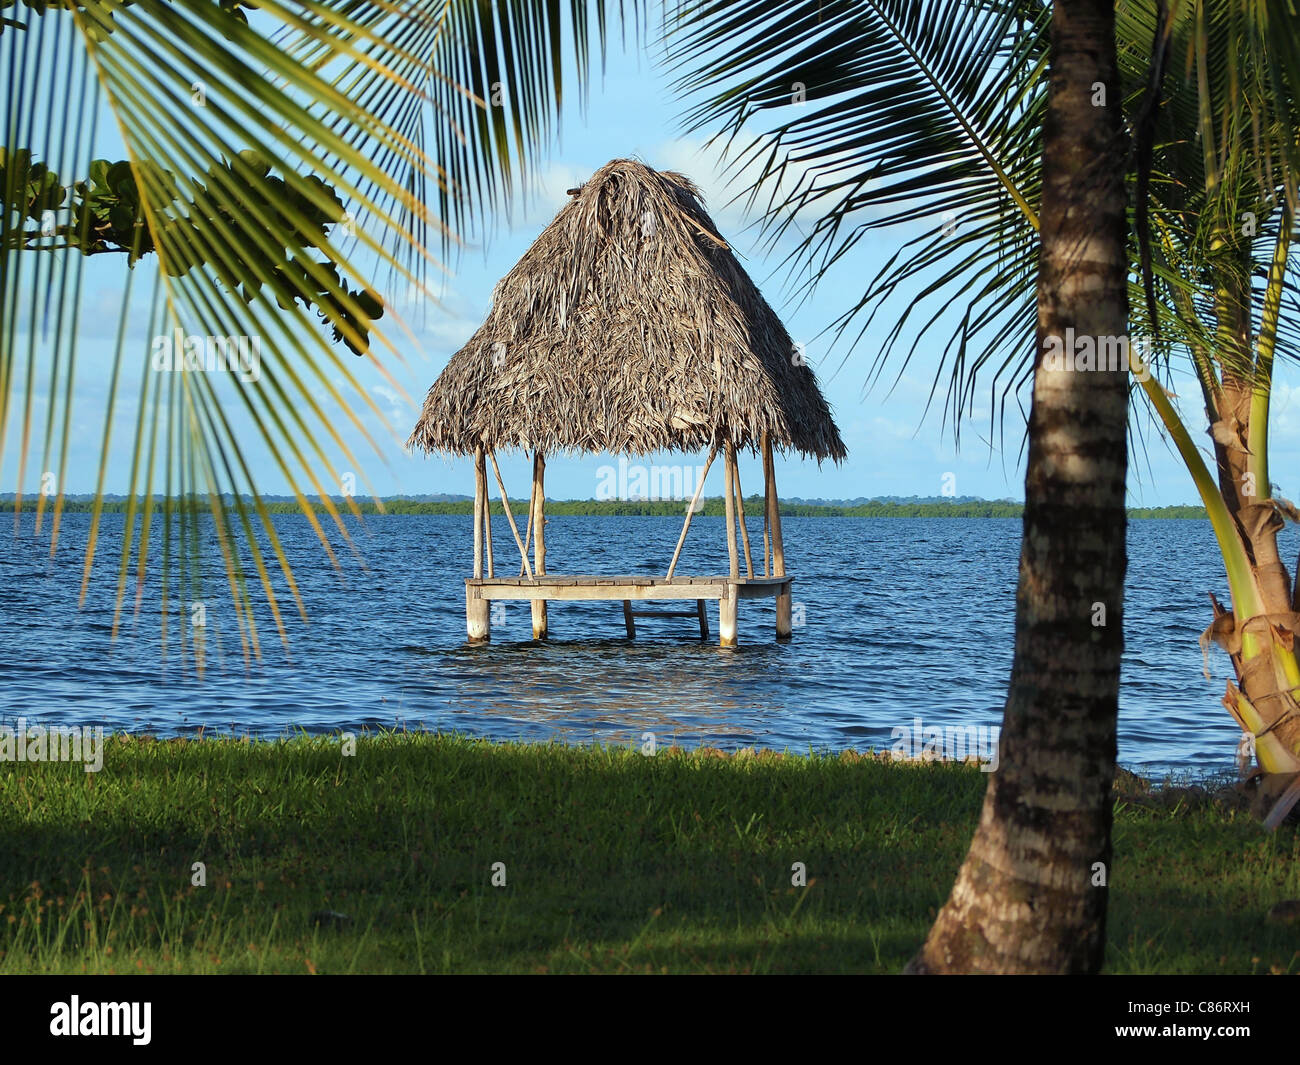 Tropical hut over water with thatched palm roof, Caribbean sea, Central America, Panama Stock Photo